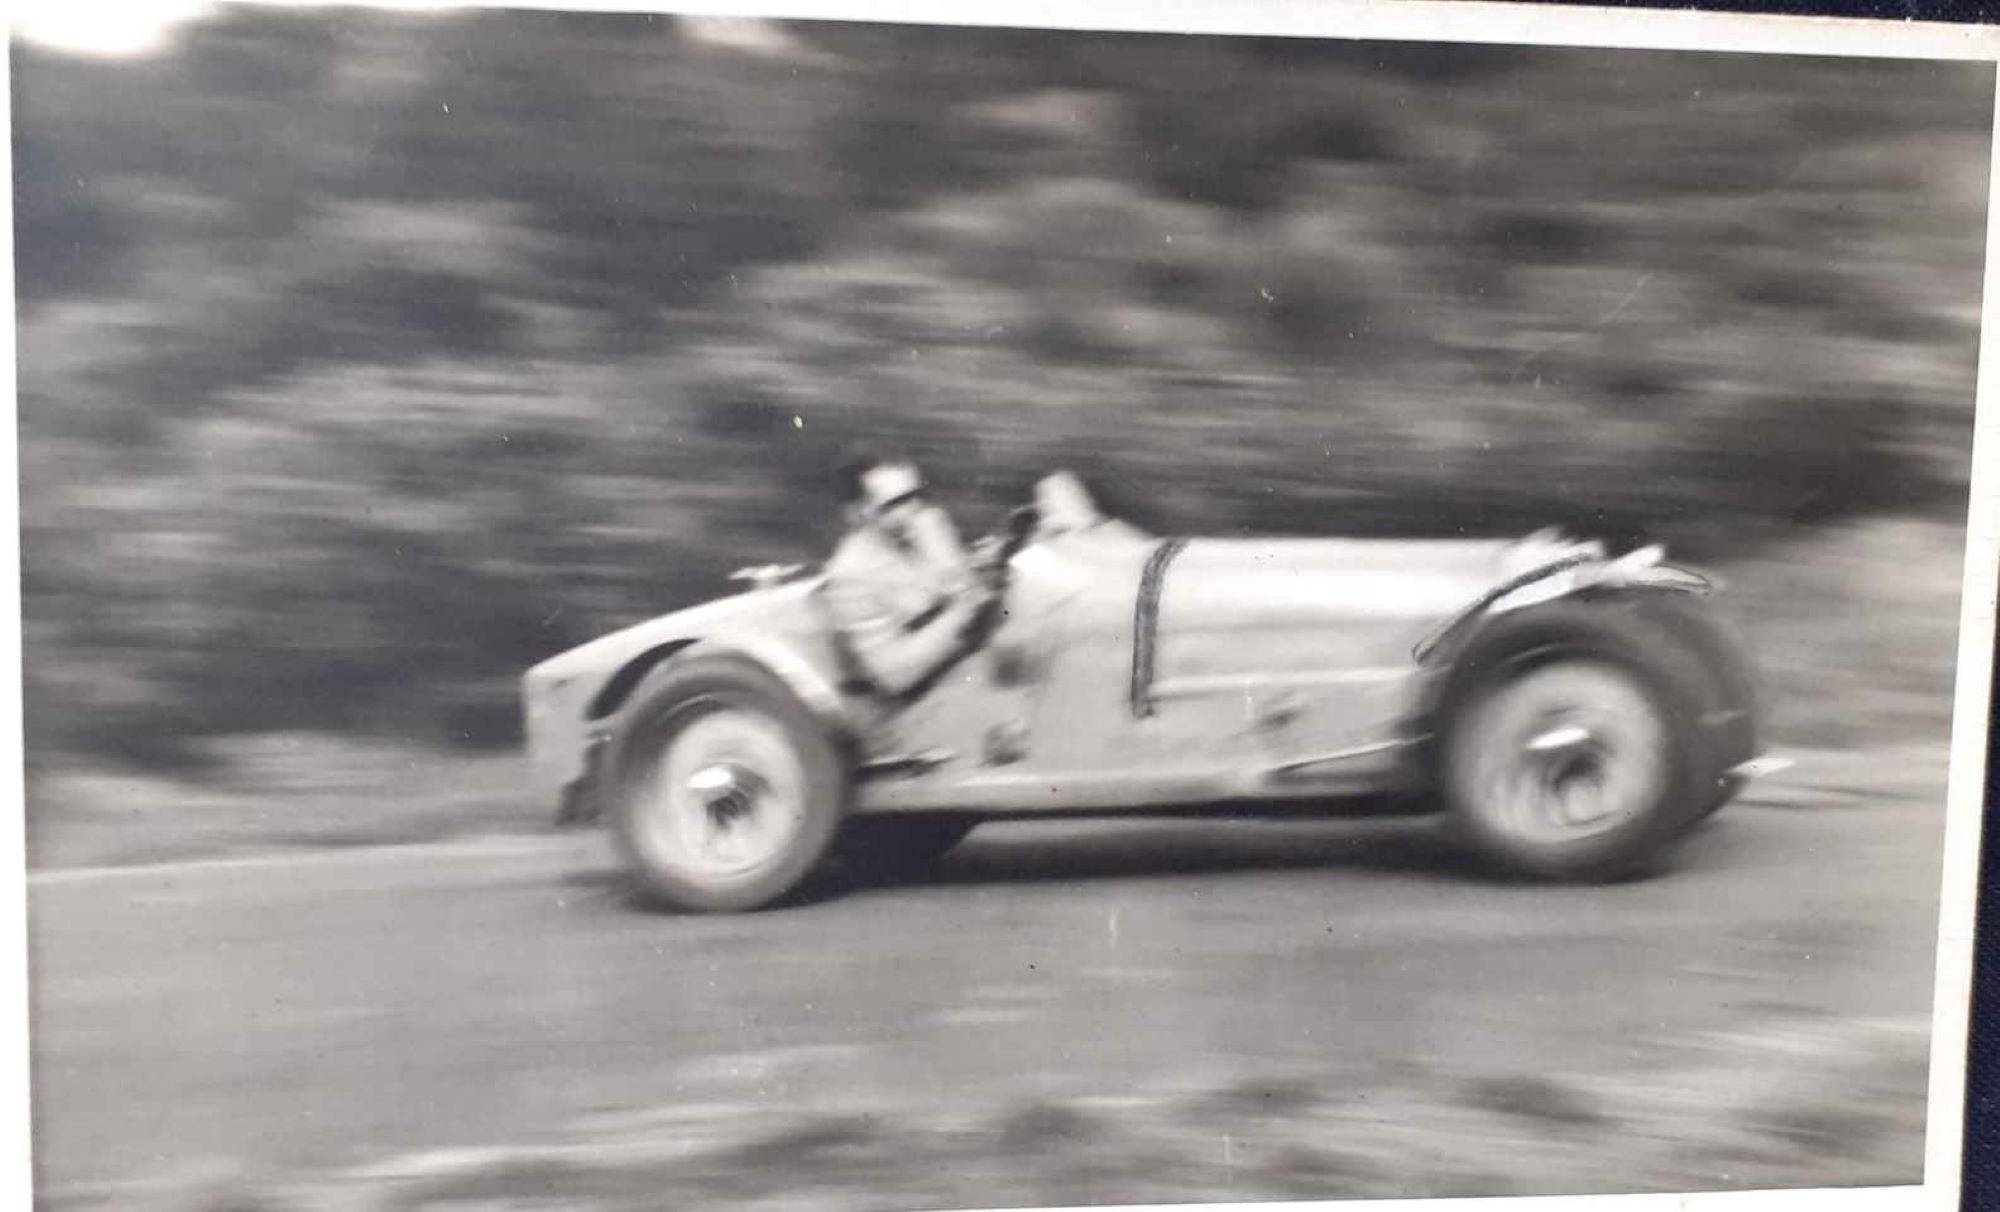 Name:  NSCC 1950 #0116 Bugatti T35 at speed - light colour 1950's - image Graeme Wells arch Anthony Wel.jpg
Views: 216
Size:  158.1 KB